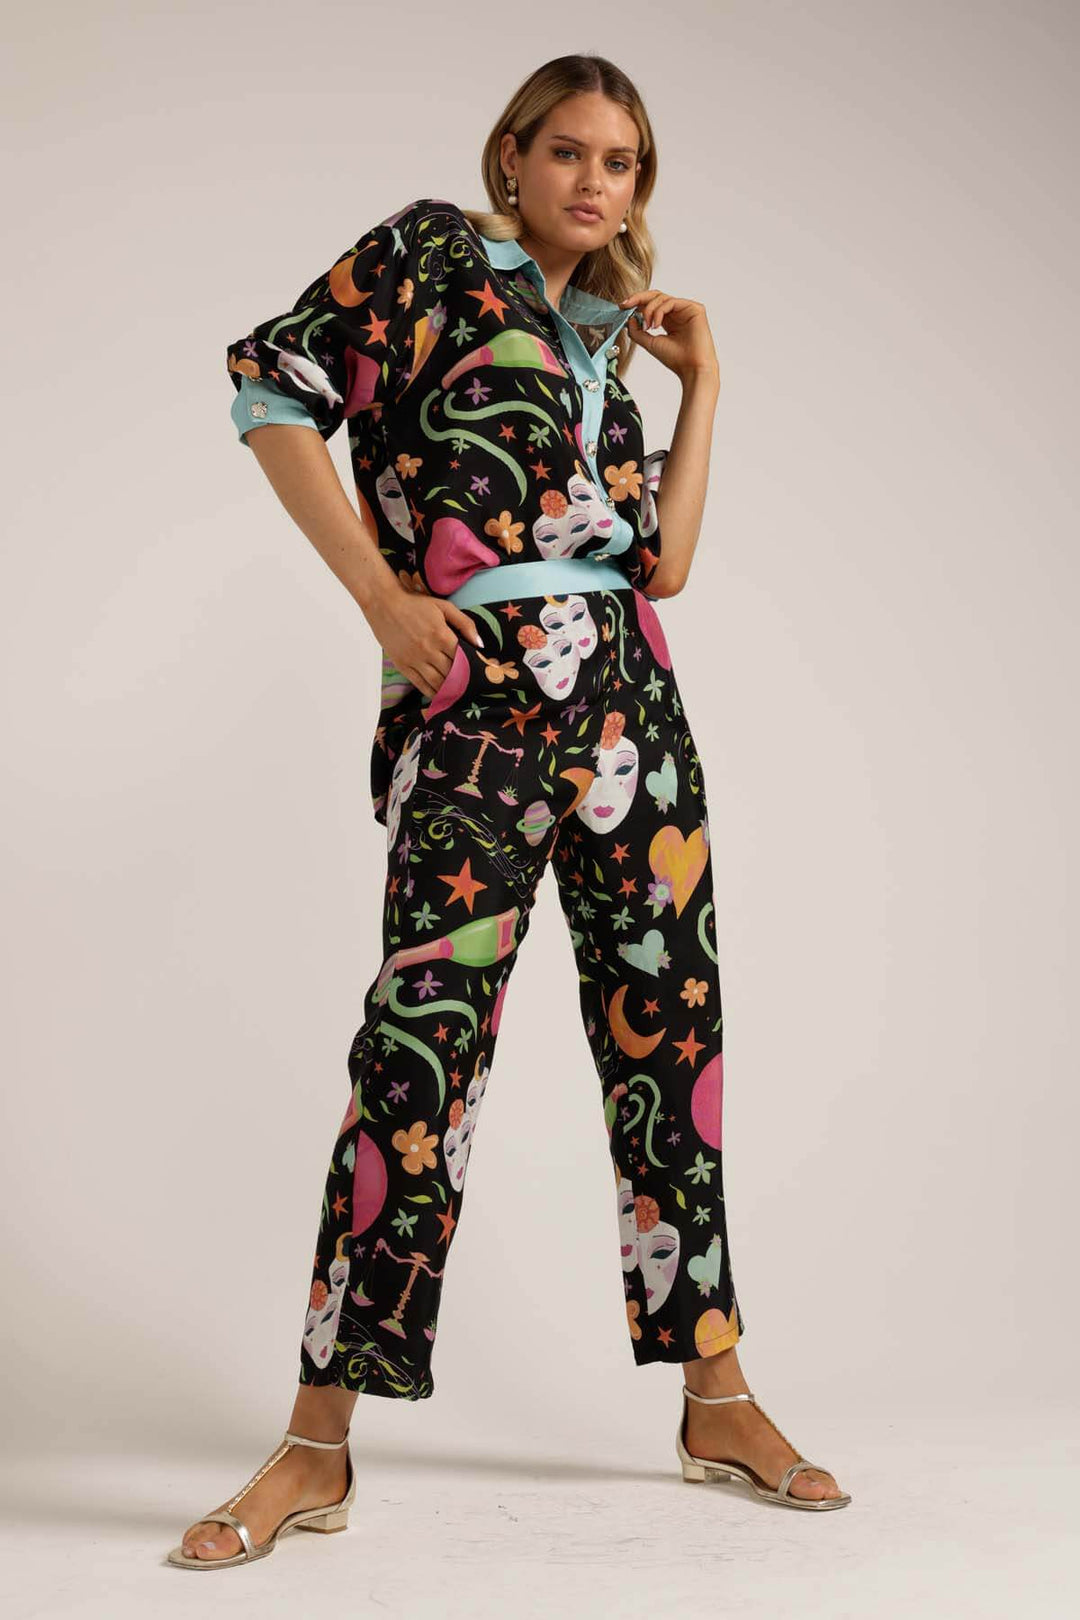 The Social Butterfly Pants